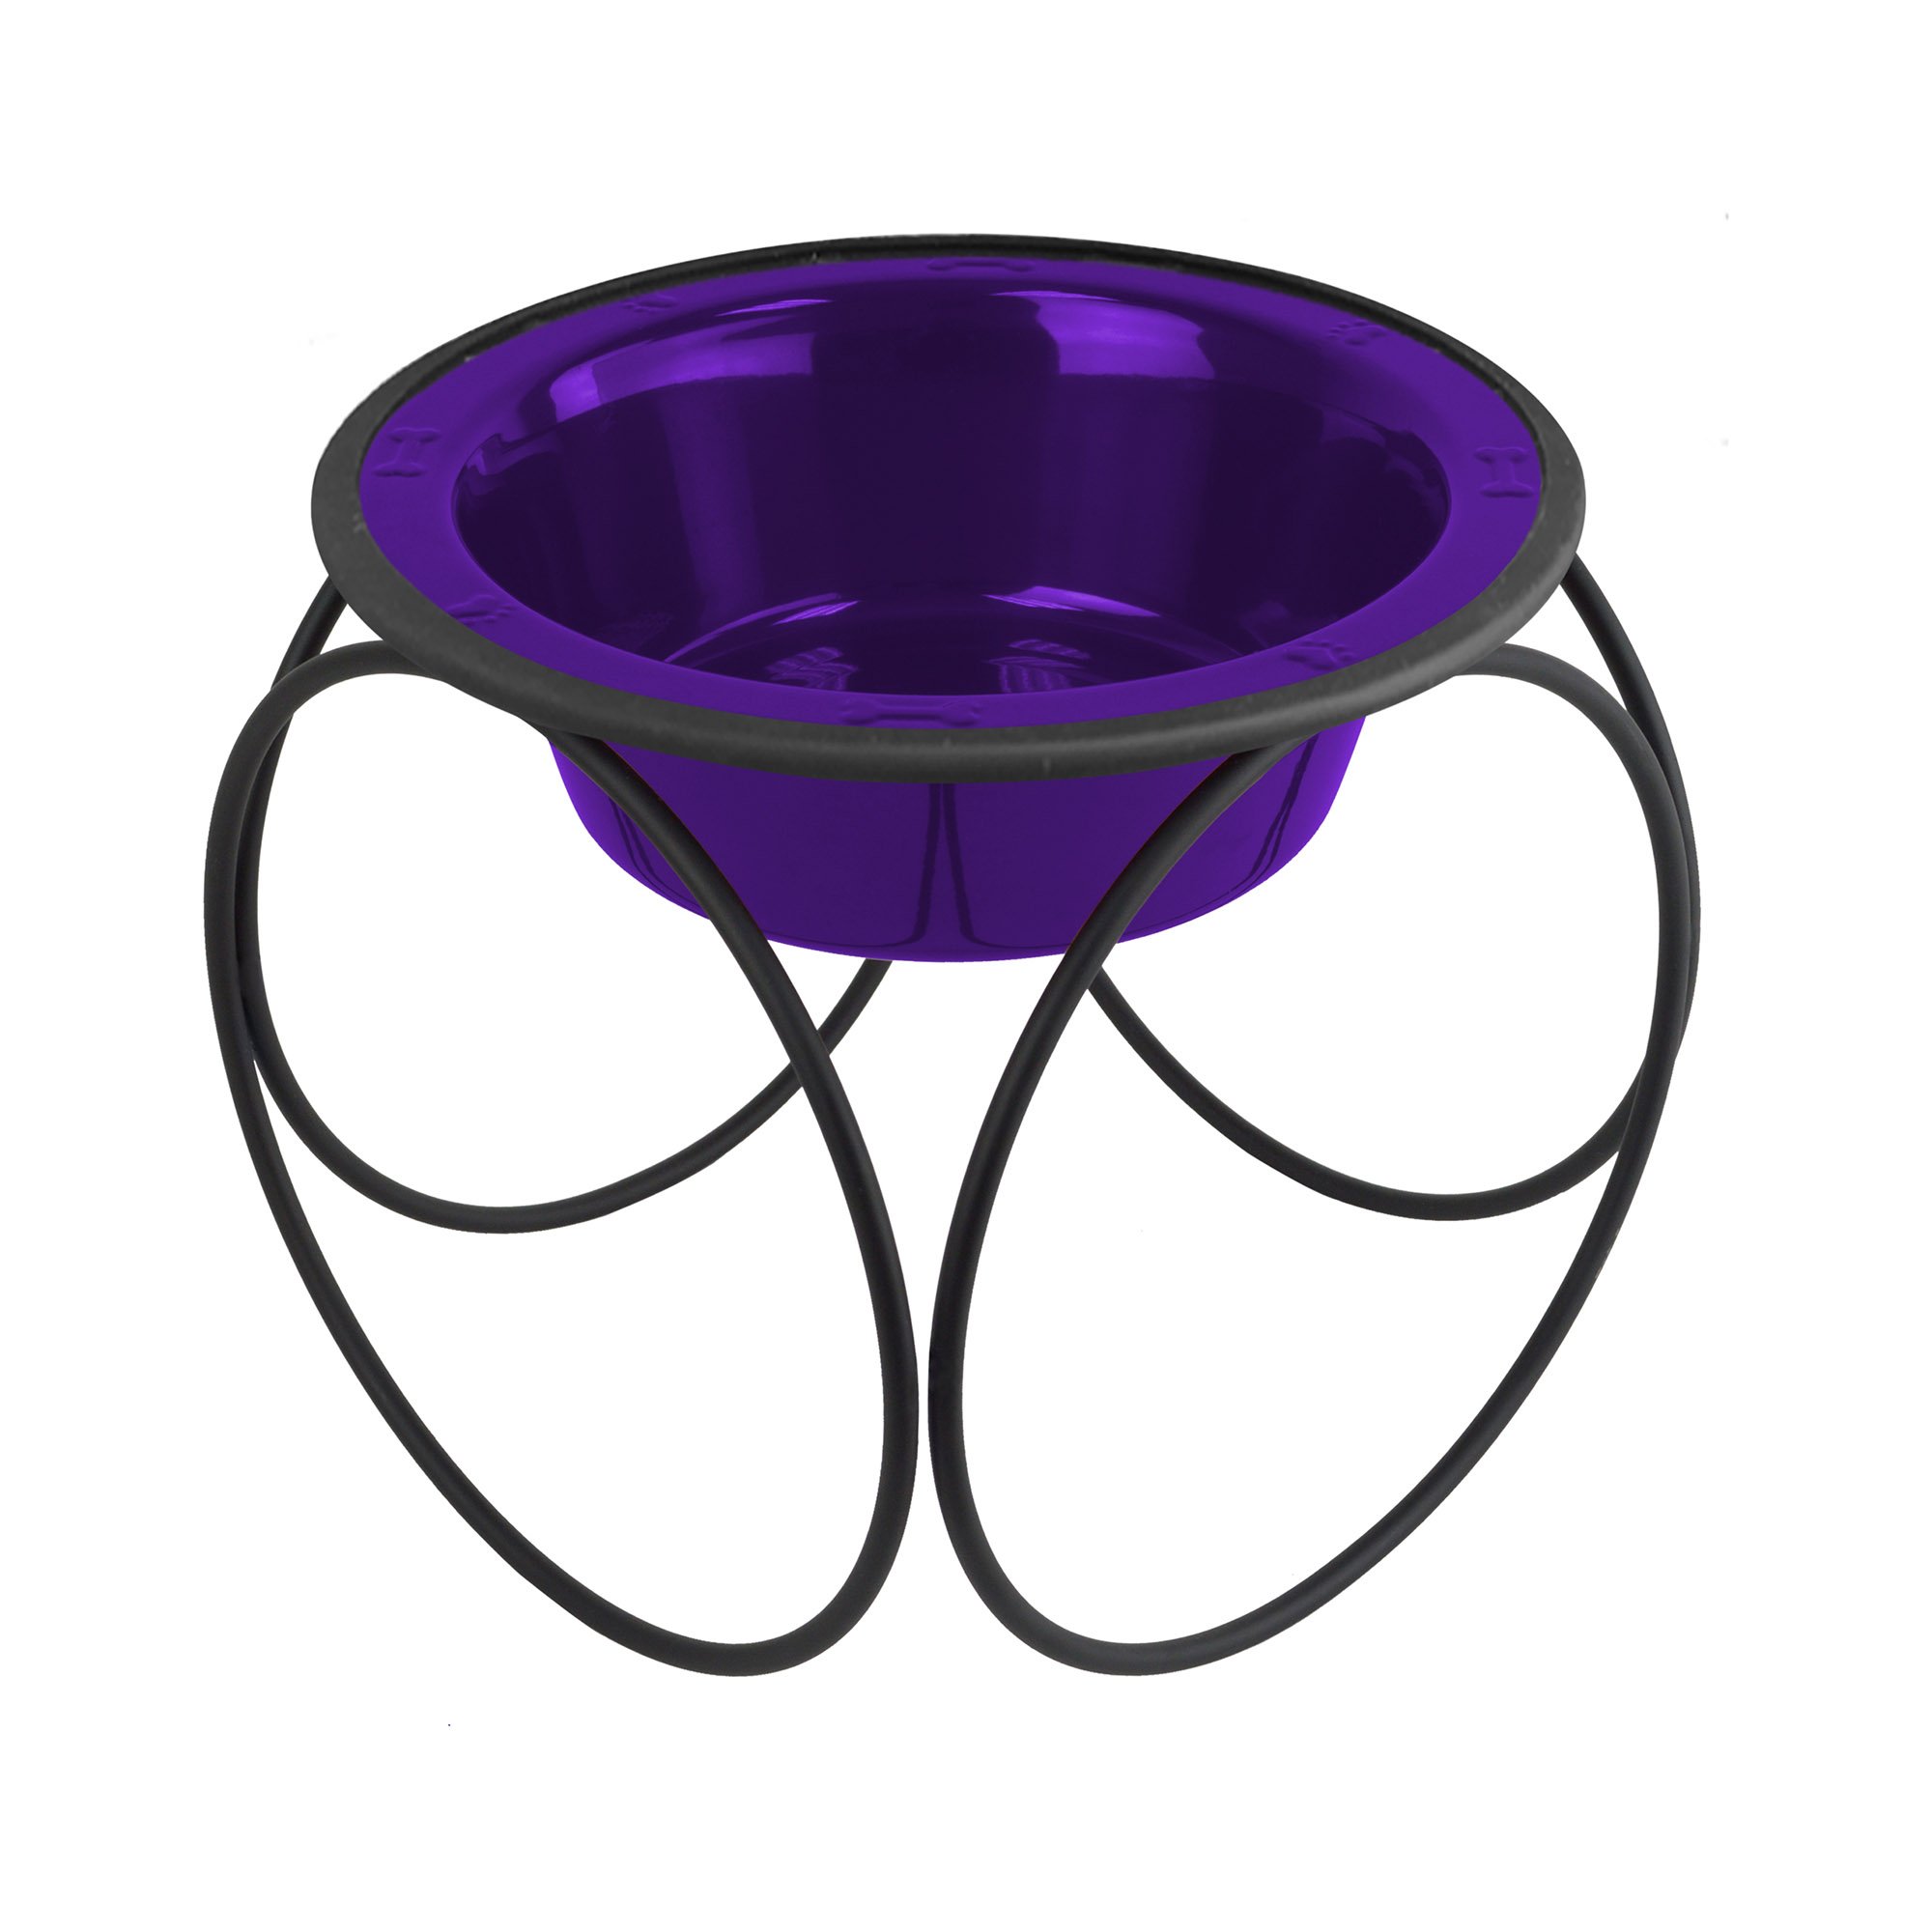 Platinum Pets Single Olympic Diner Feeder with Stainless Steel Dog Bowl, 6.25 Cup/50 oz, Electric Purple